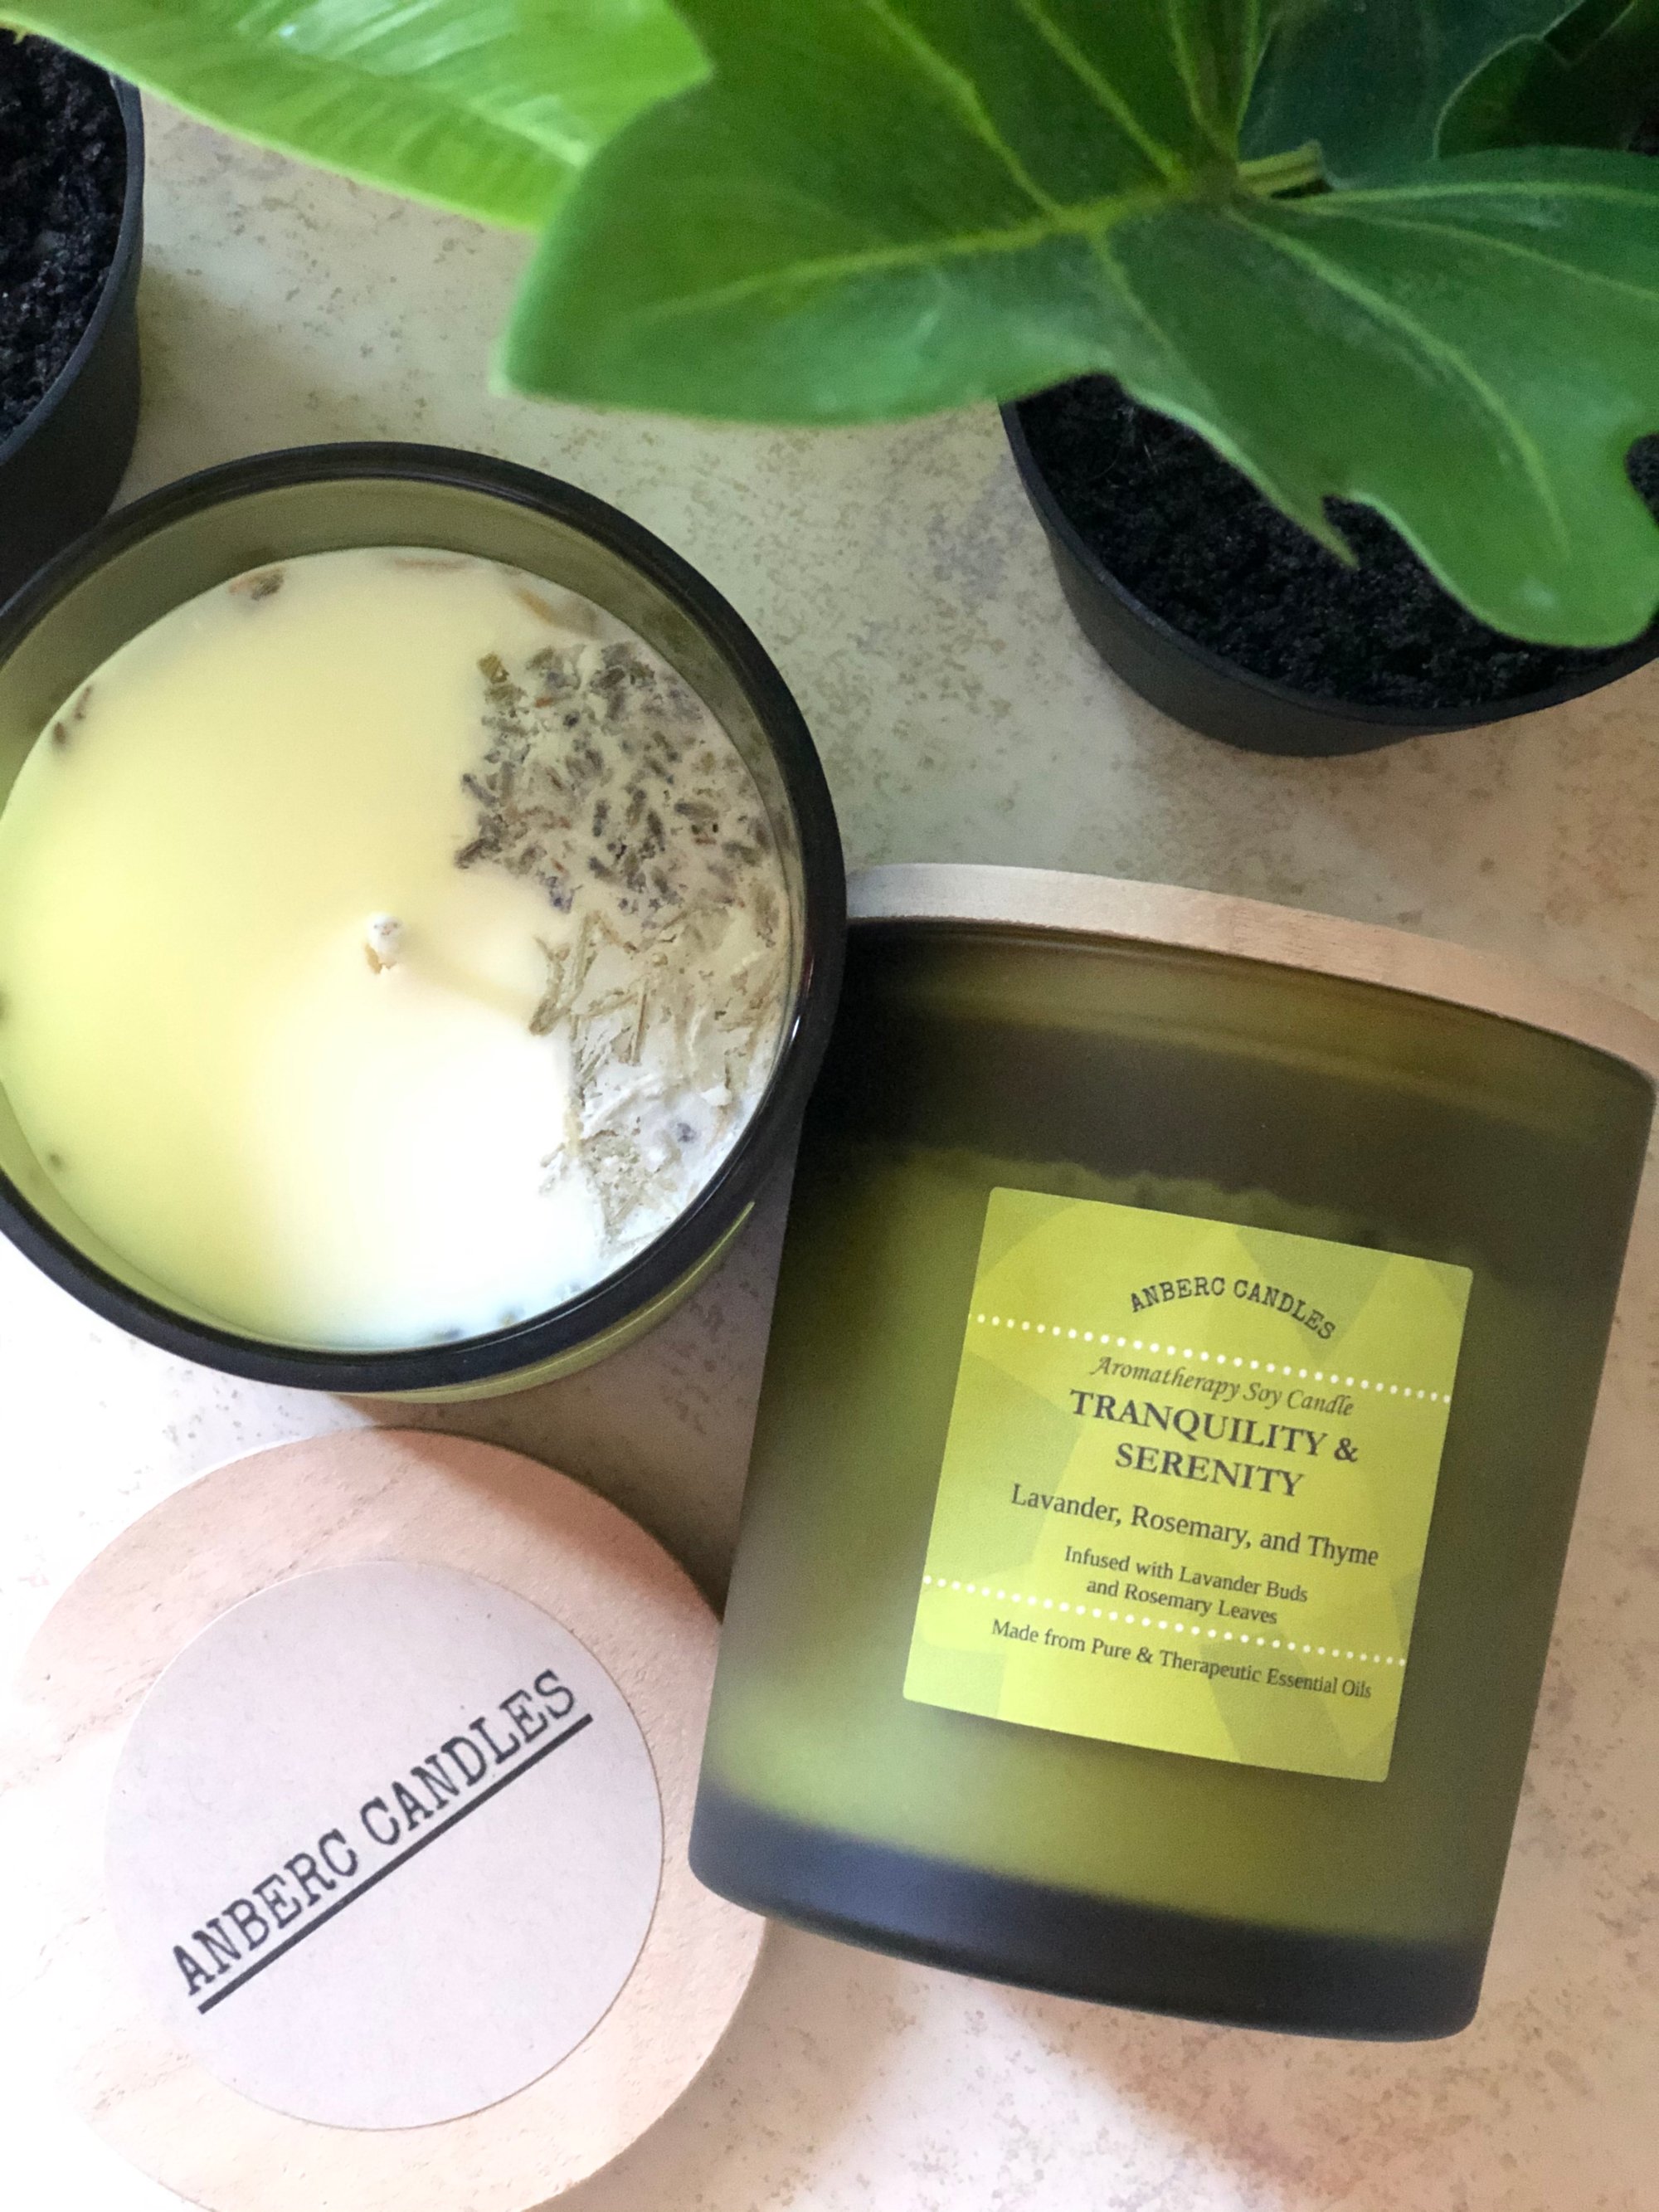 TRANQUILITY + SERENITY | Anberc Candles